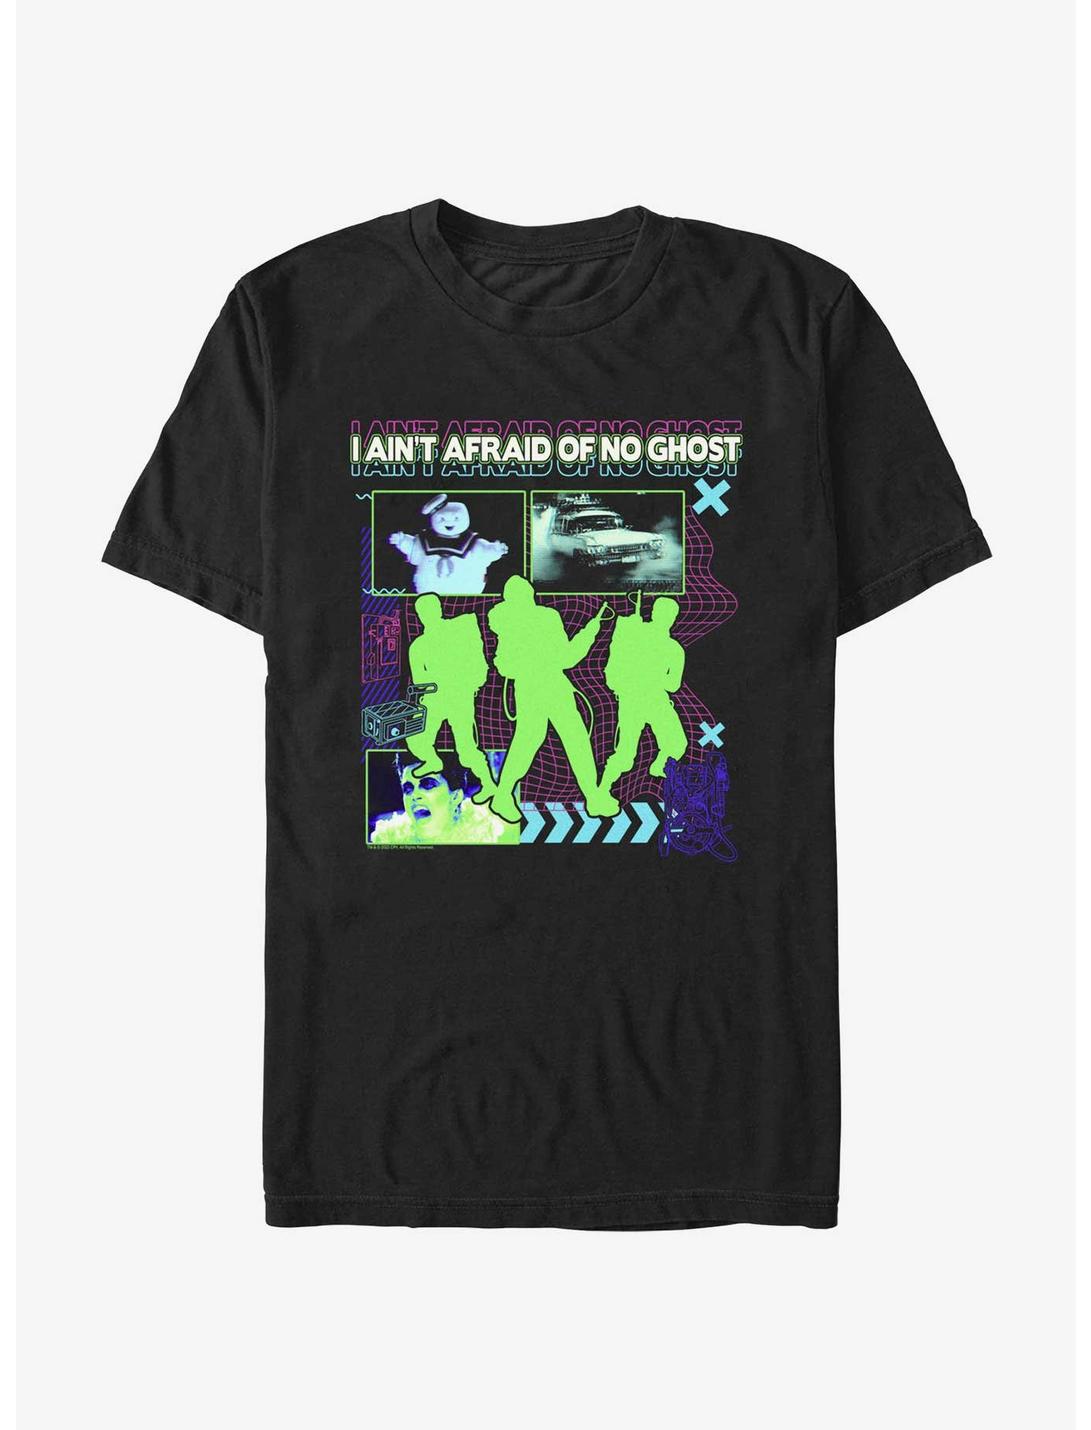 Ghostbusters I Ain't Afraid Of No Ghost Tech T-Shirt, BLACK, hi-res